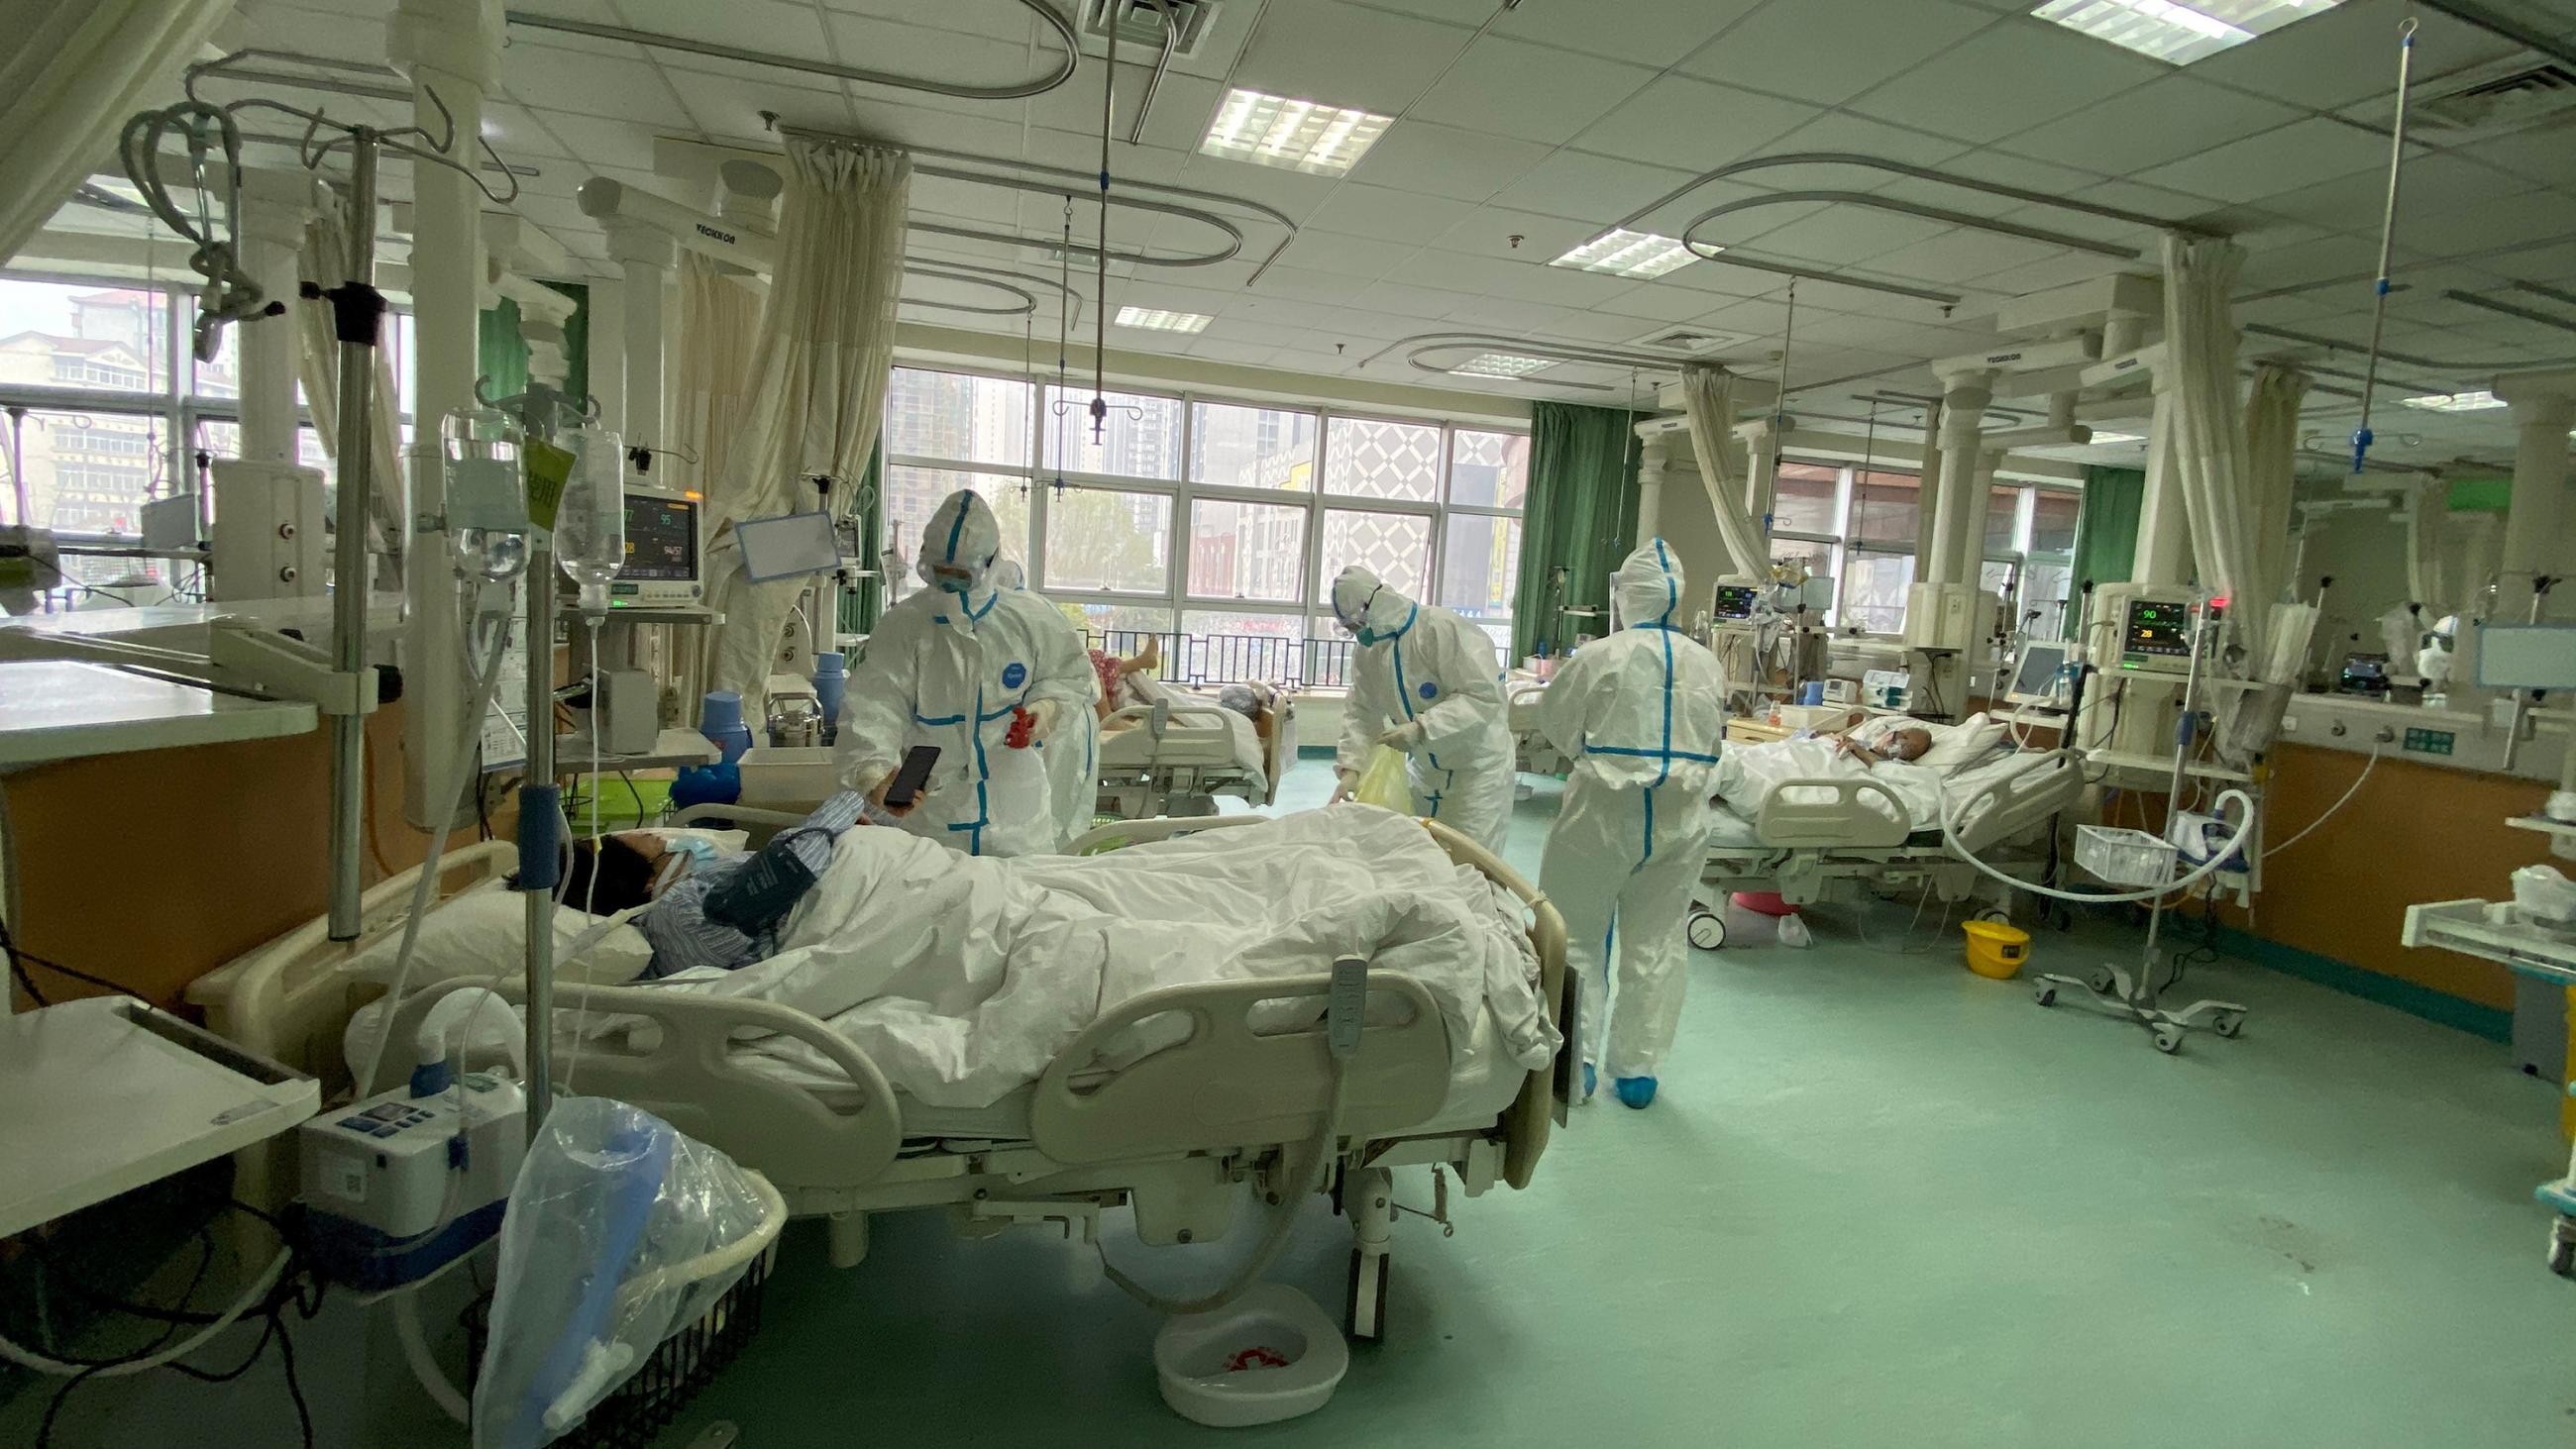 The picture shows a modern hospital ward with a patient in bed covered in protective gear as well as several health care workers covered head-to-toe in the same. 